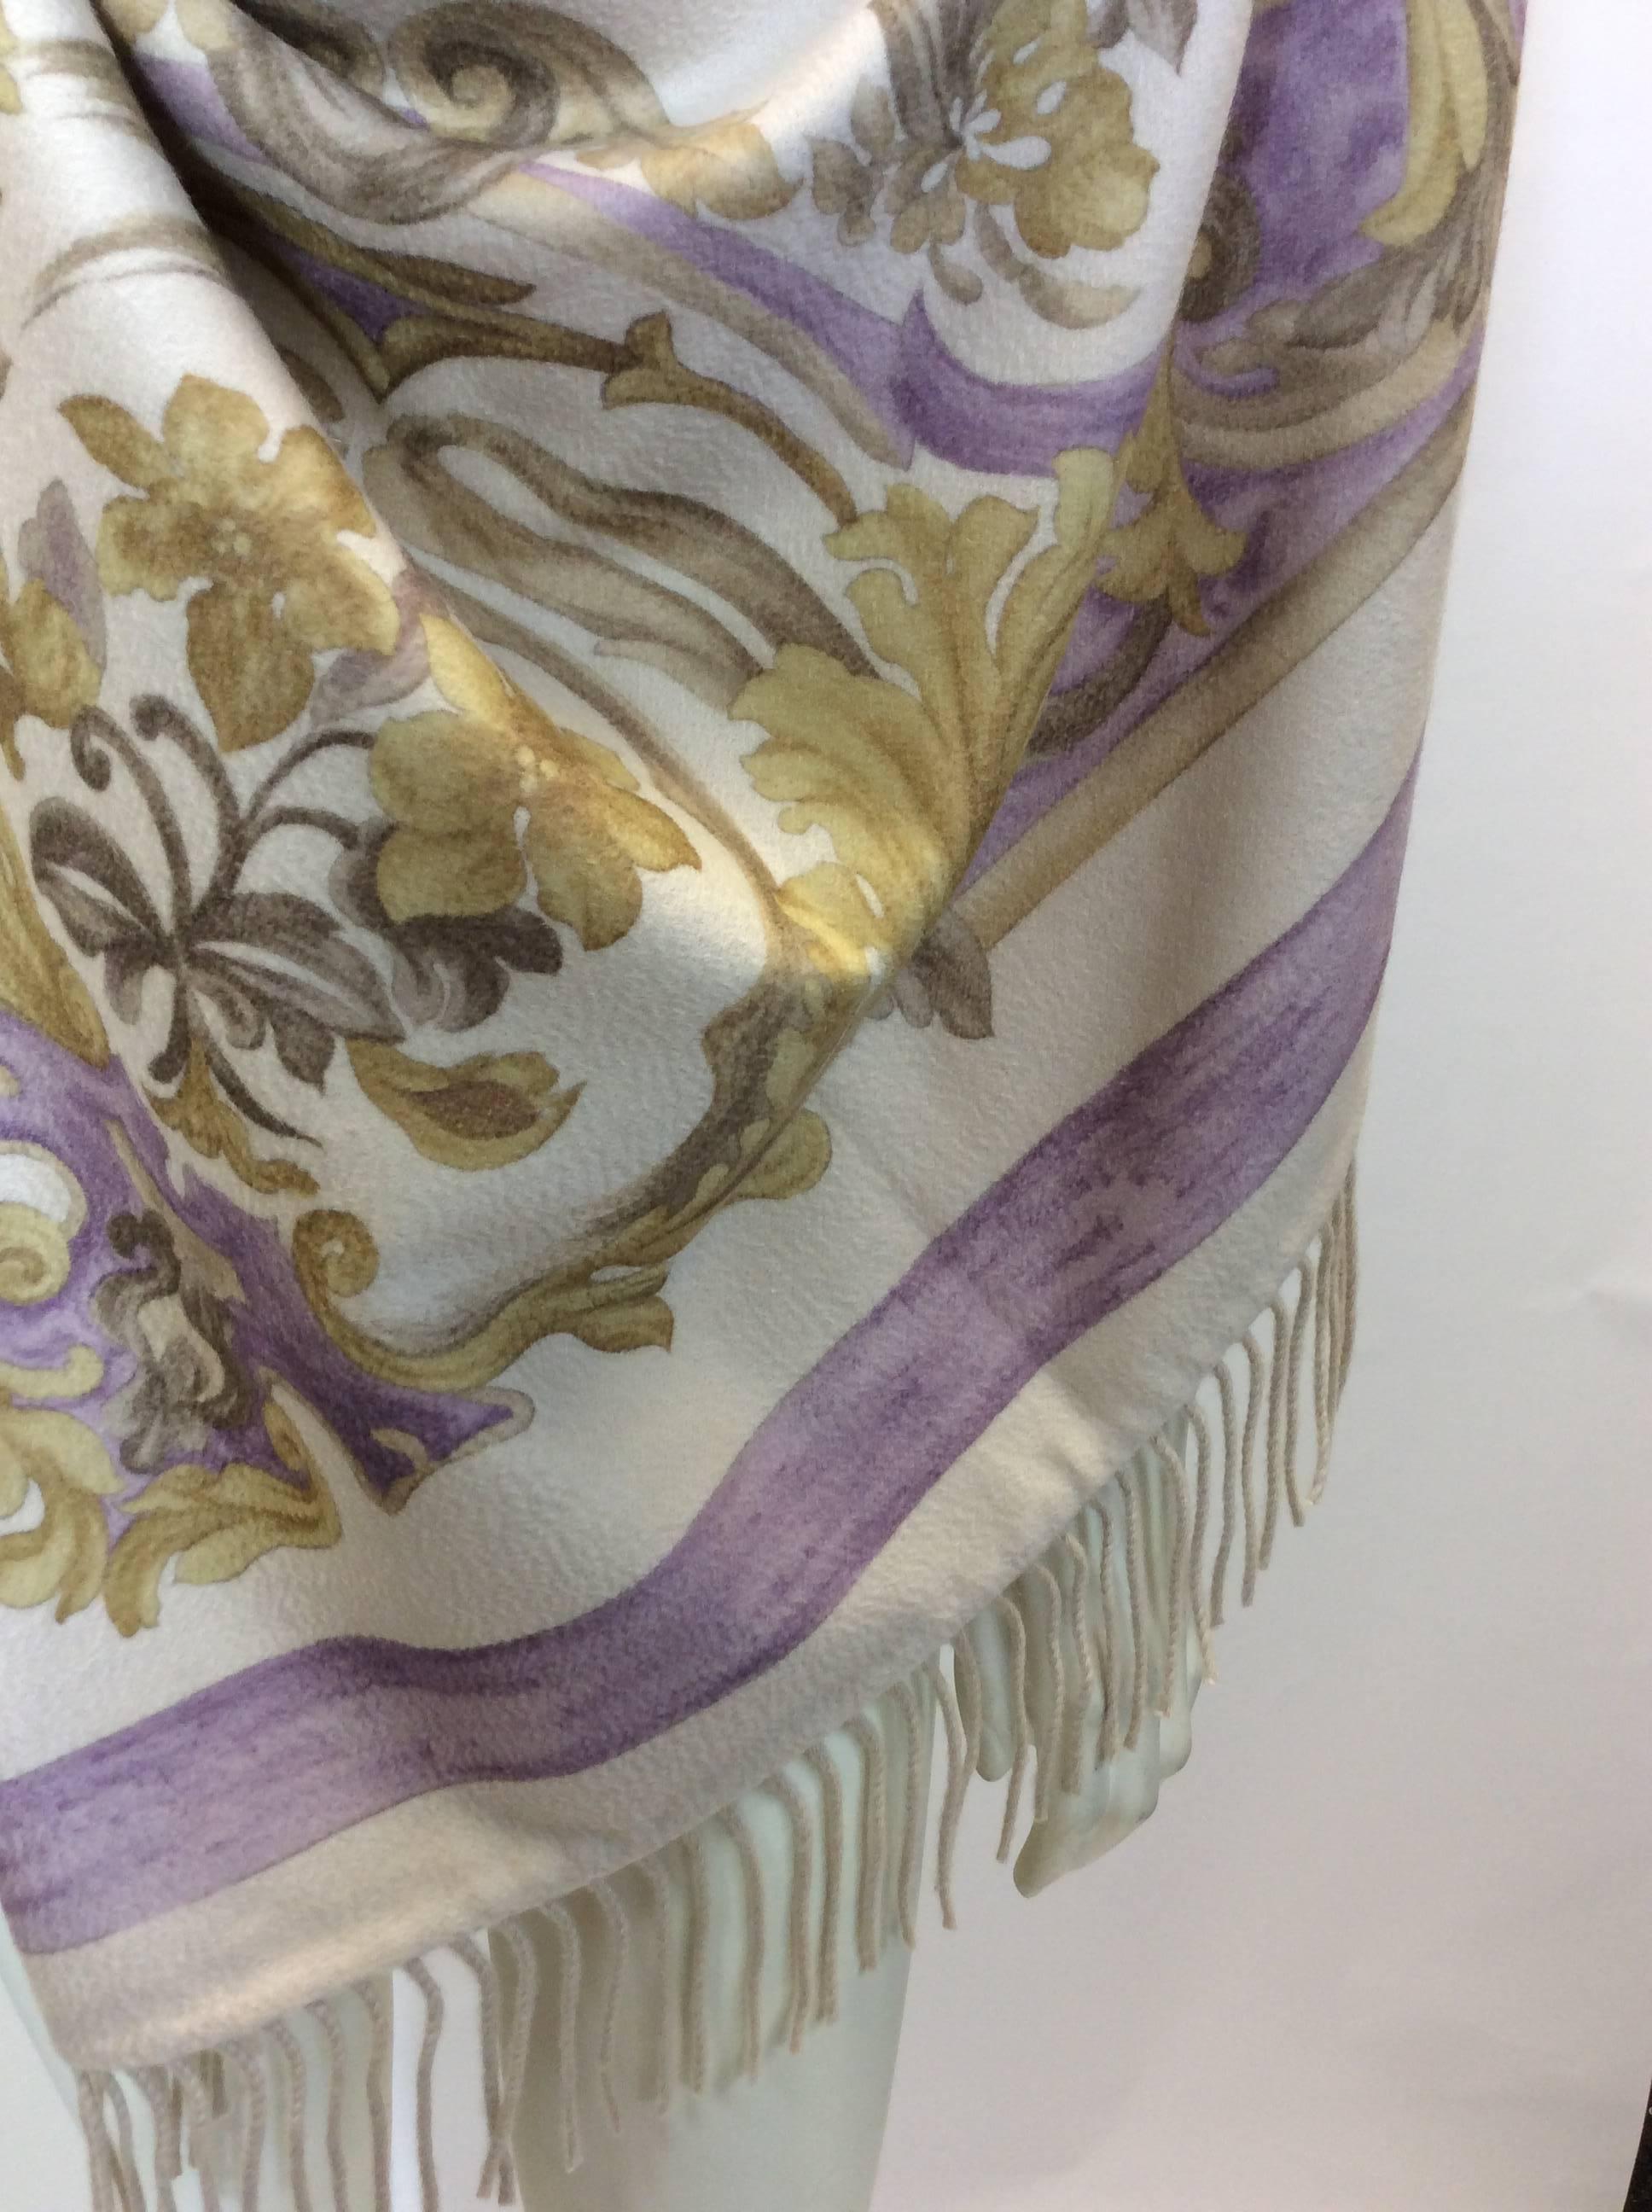 Loro Piana Cream Floral Printed Cashmere Shawl
100% Cashmere
Made in Italy
Purple and yellow floral design
Fringe trim
$1,499
60 inches length, 57 inches wide